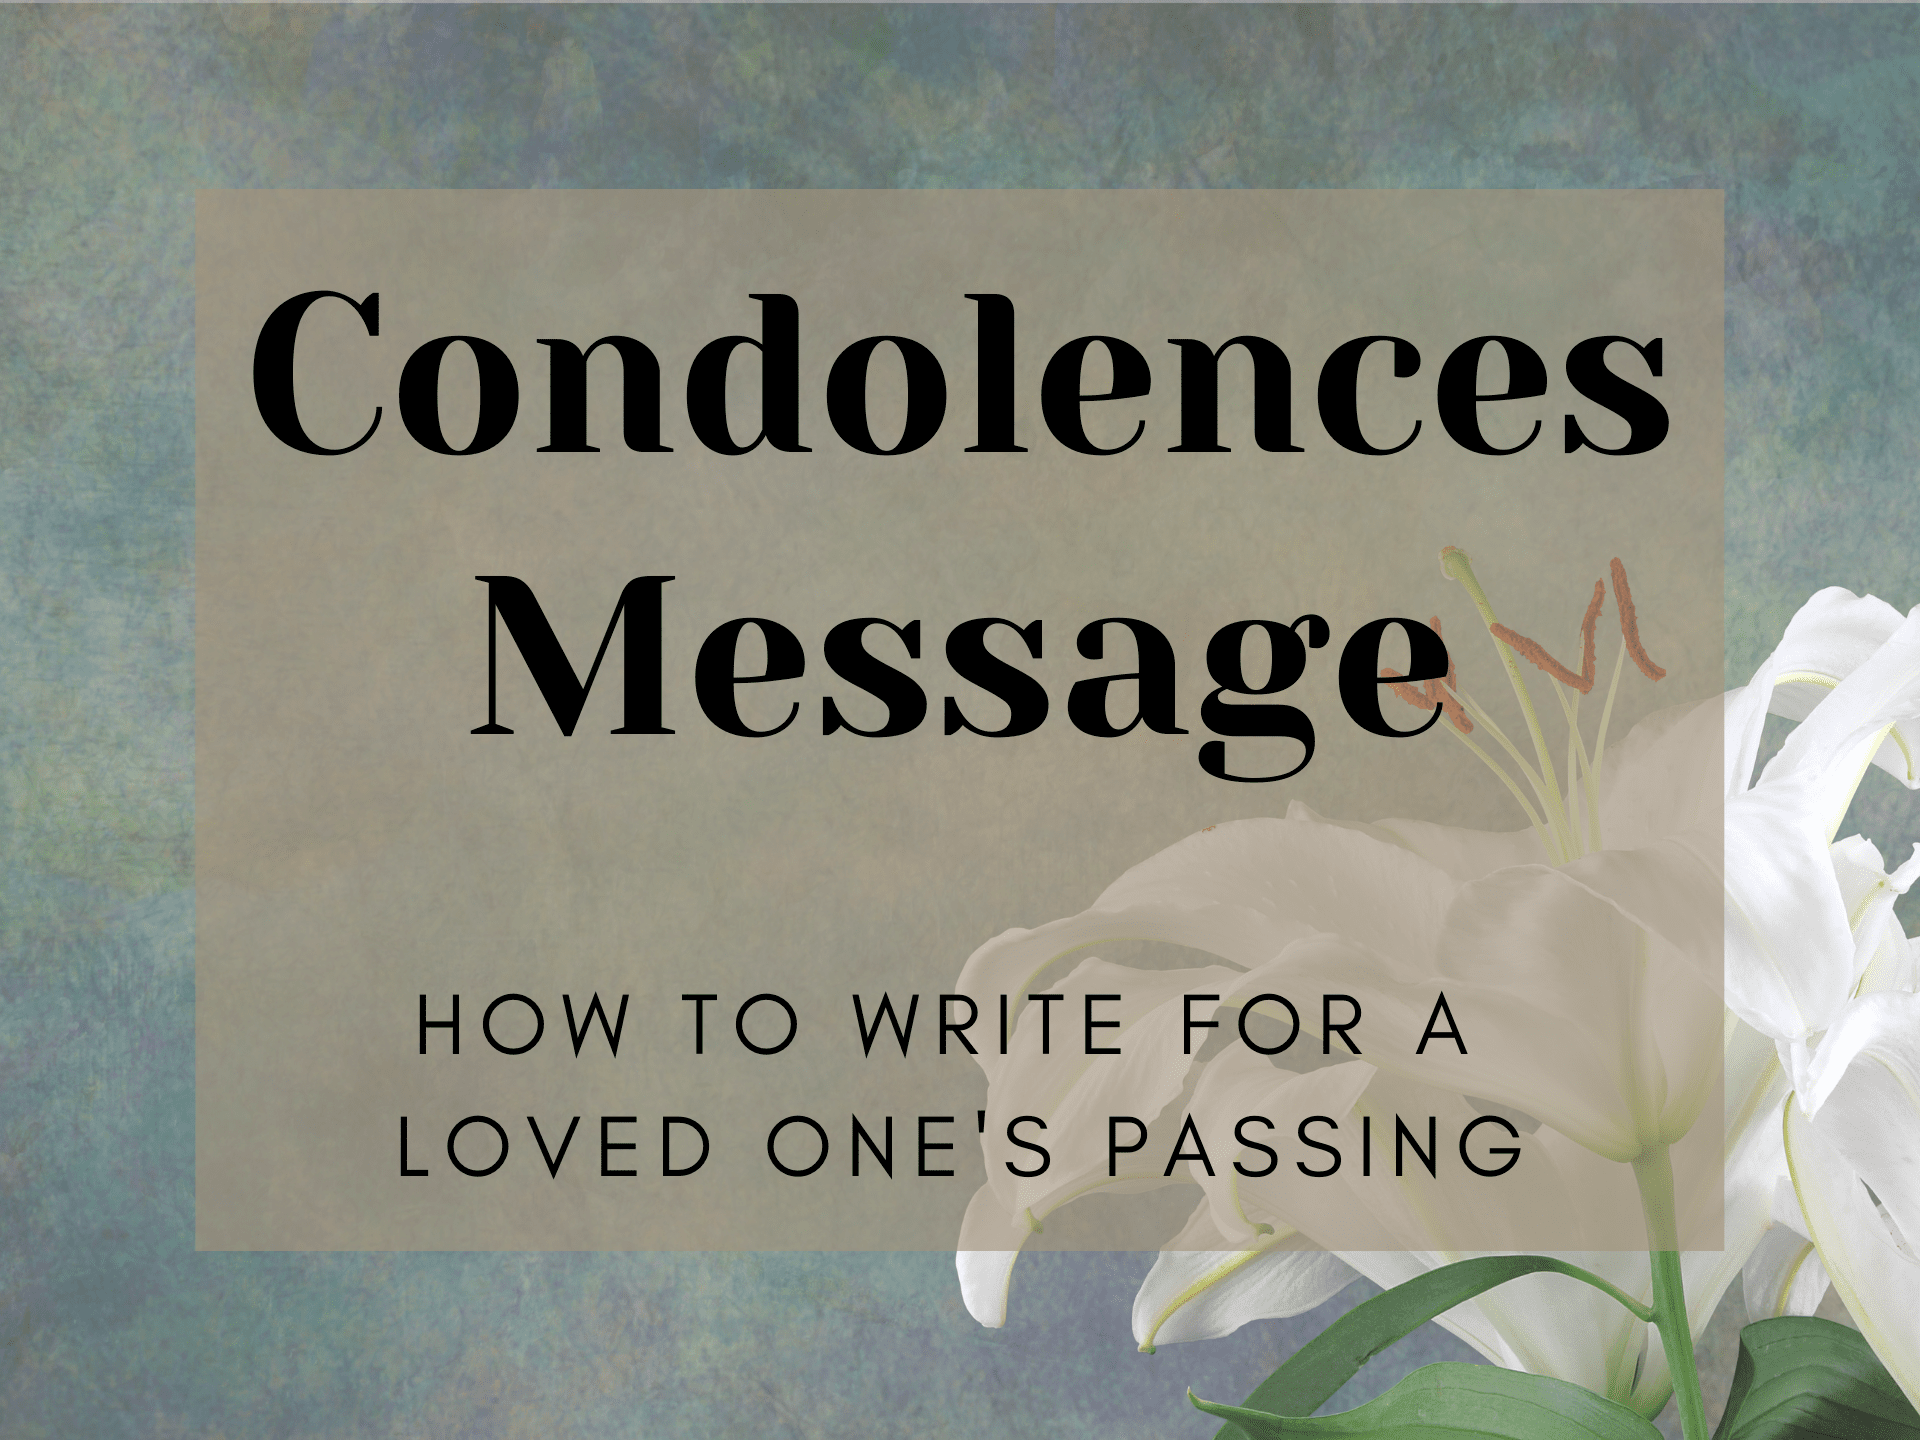 Condolences Message To A Loved One